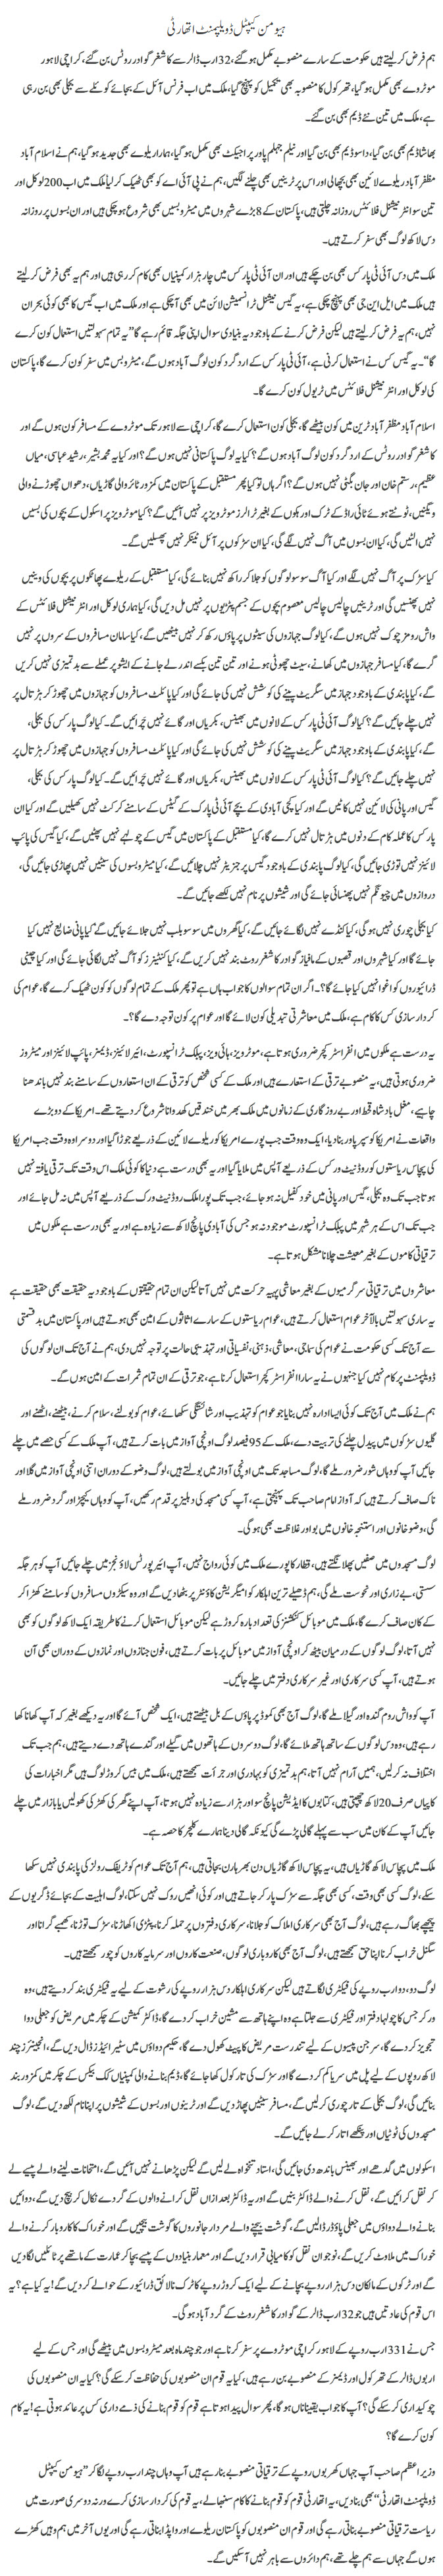 Human Capital Development Authority by Javed Chaudhry